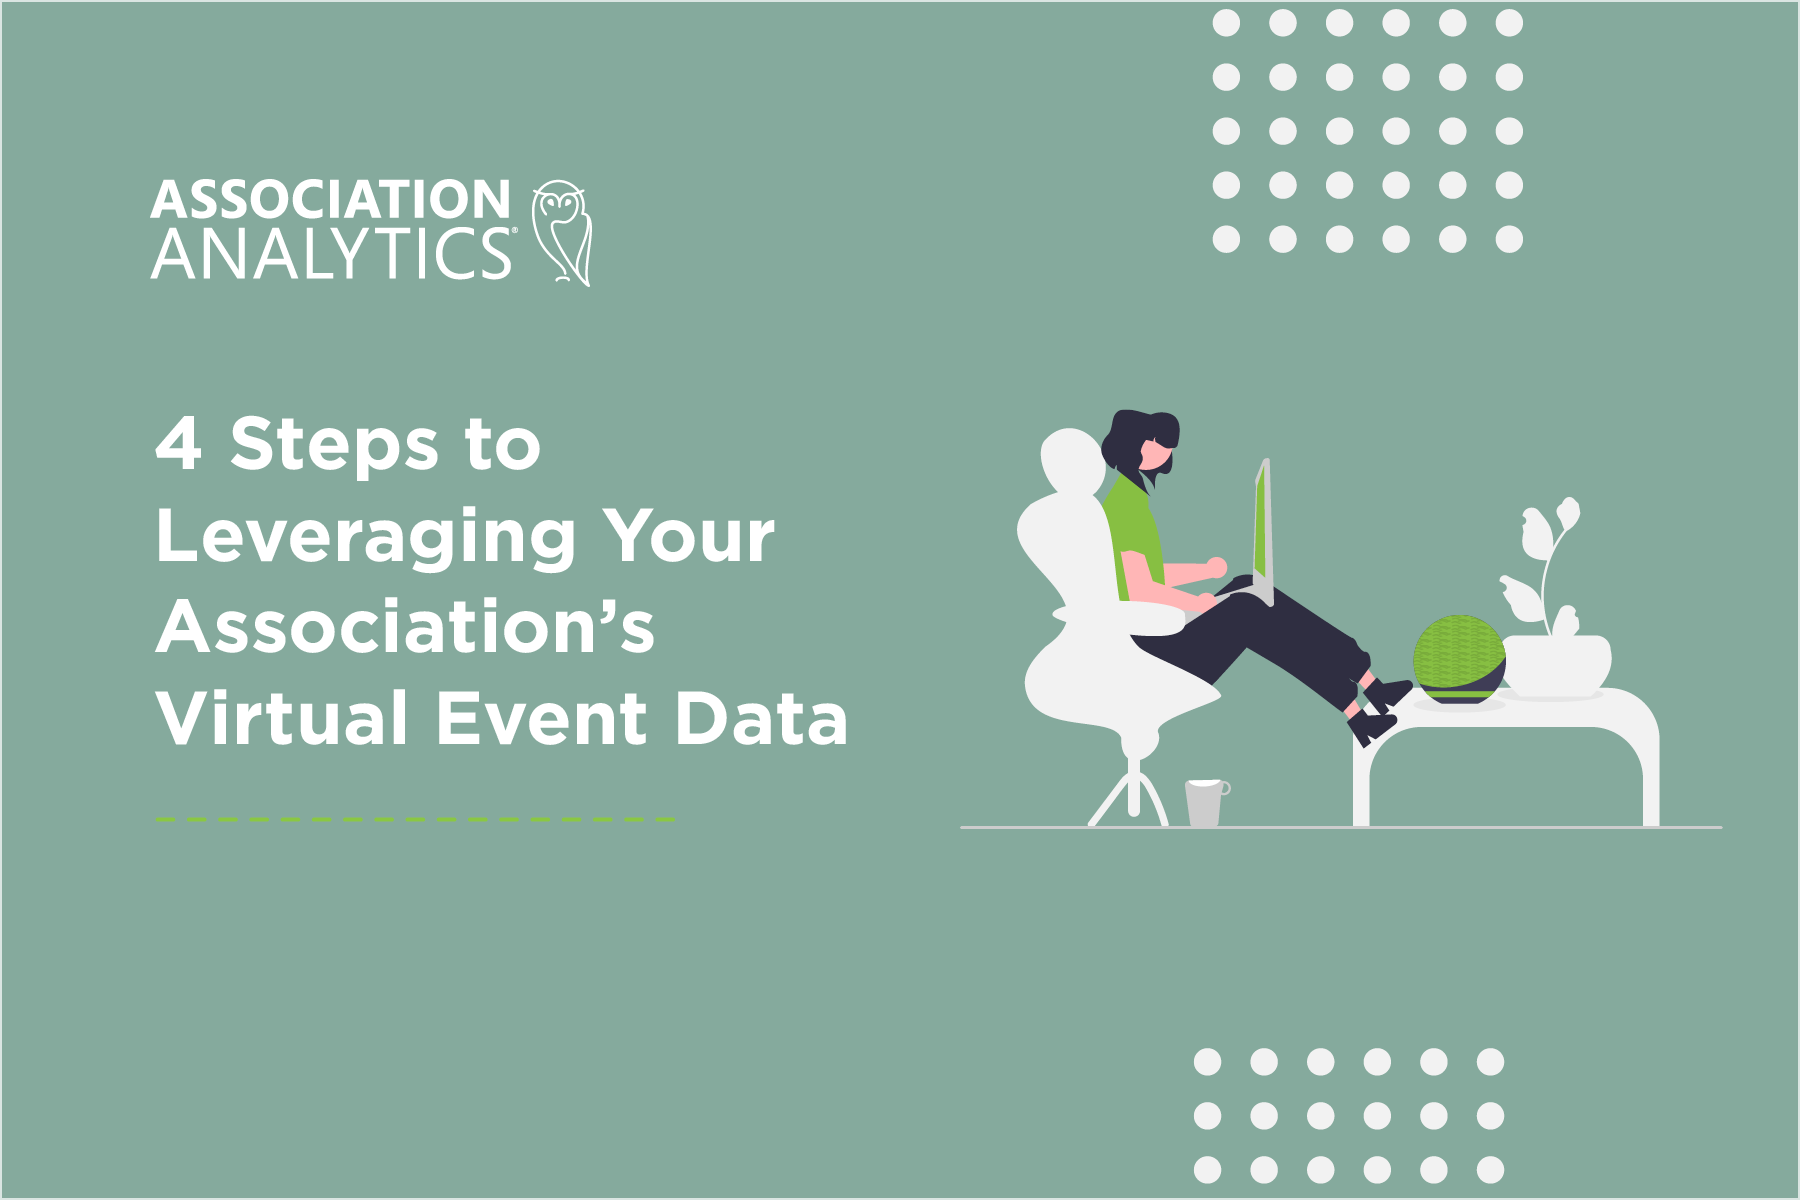 E-book - 4 Steps to Leveraging Your Association’s Virtual Event Data 2022